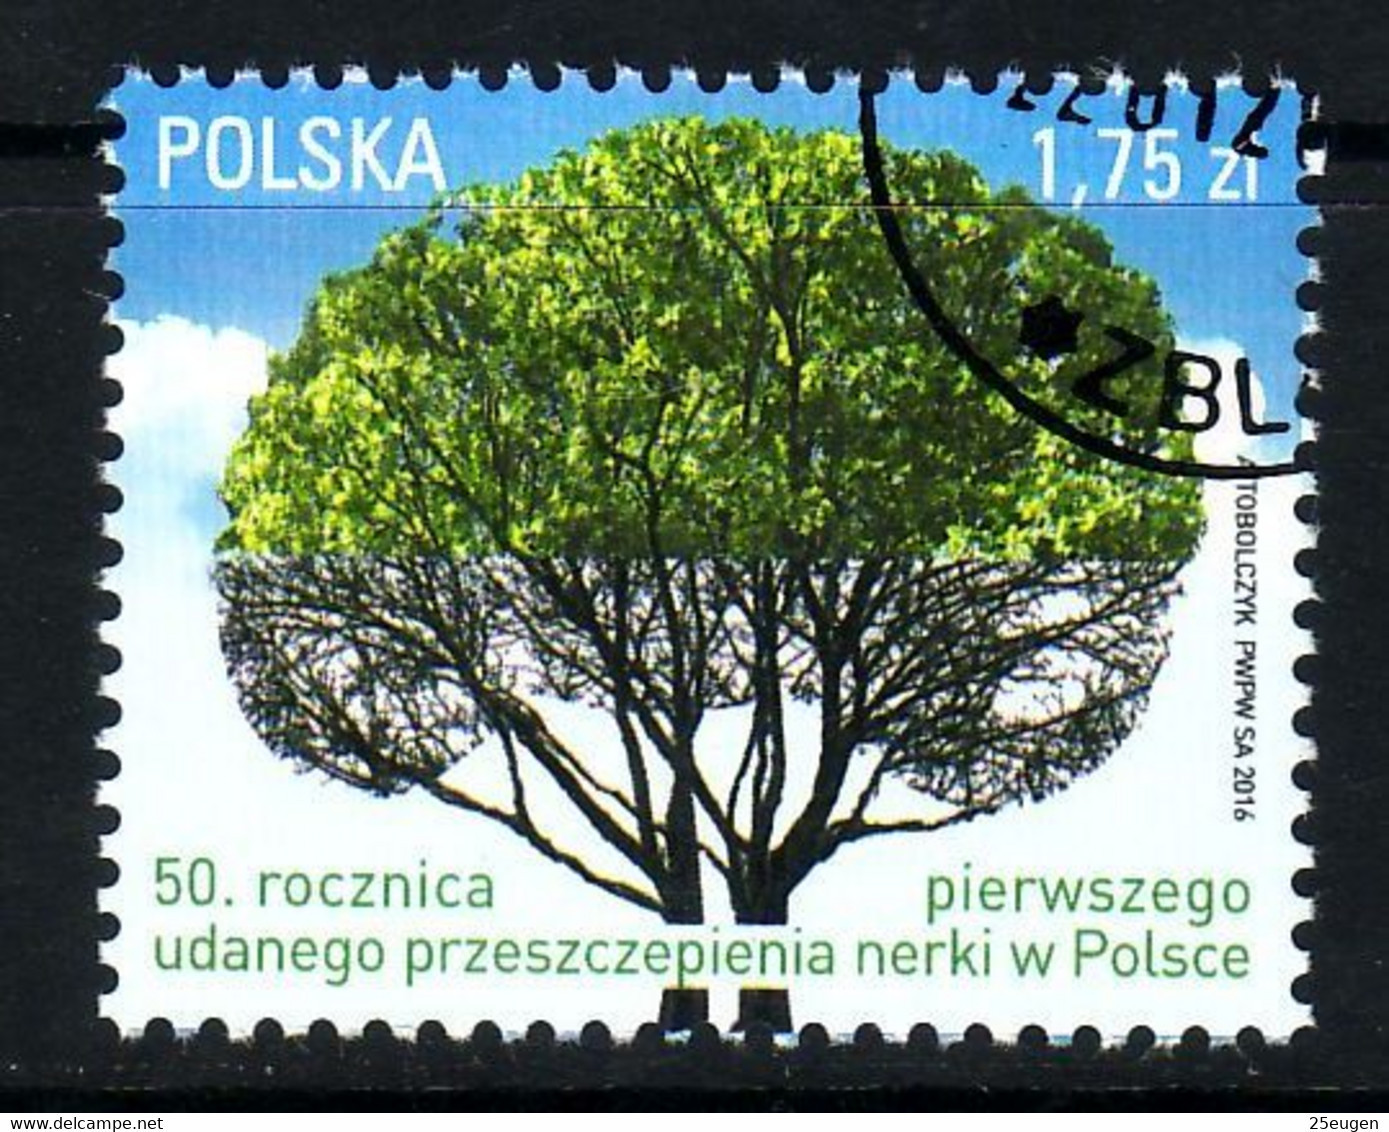 POLAND 2016 Michel No 4818 Used - Used Stamps